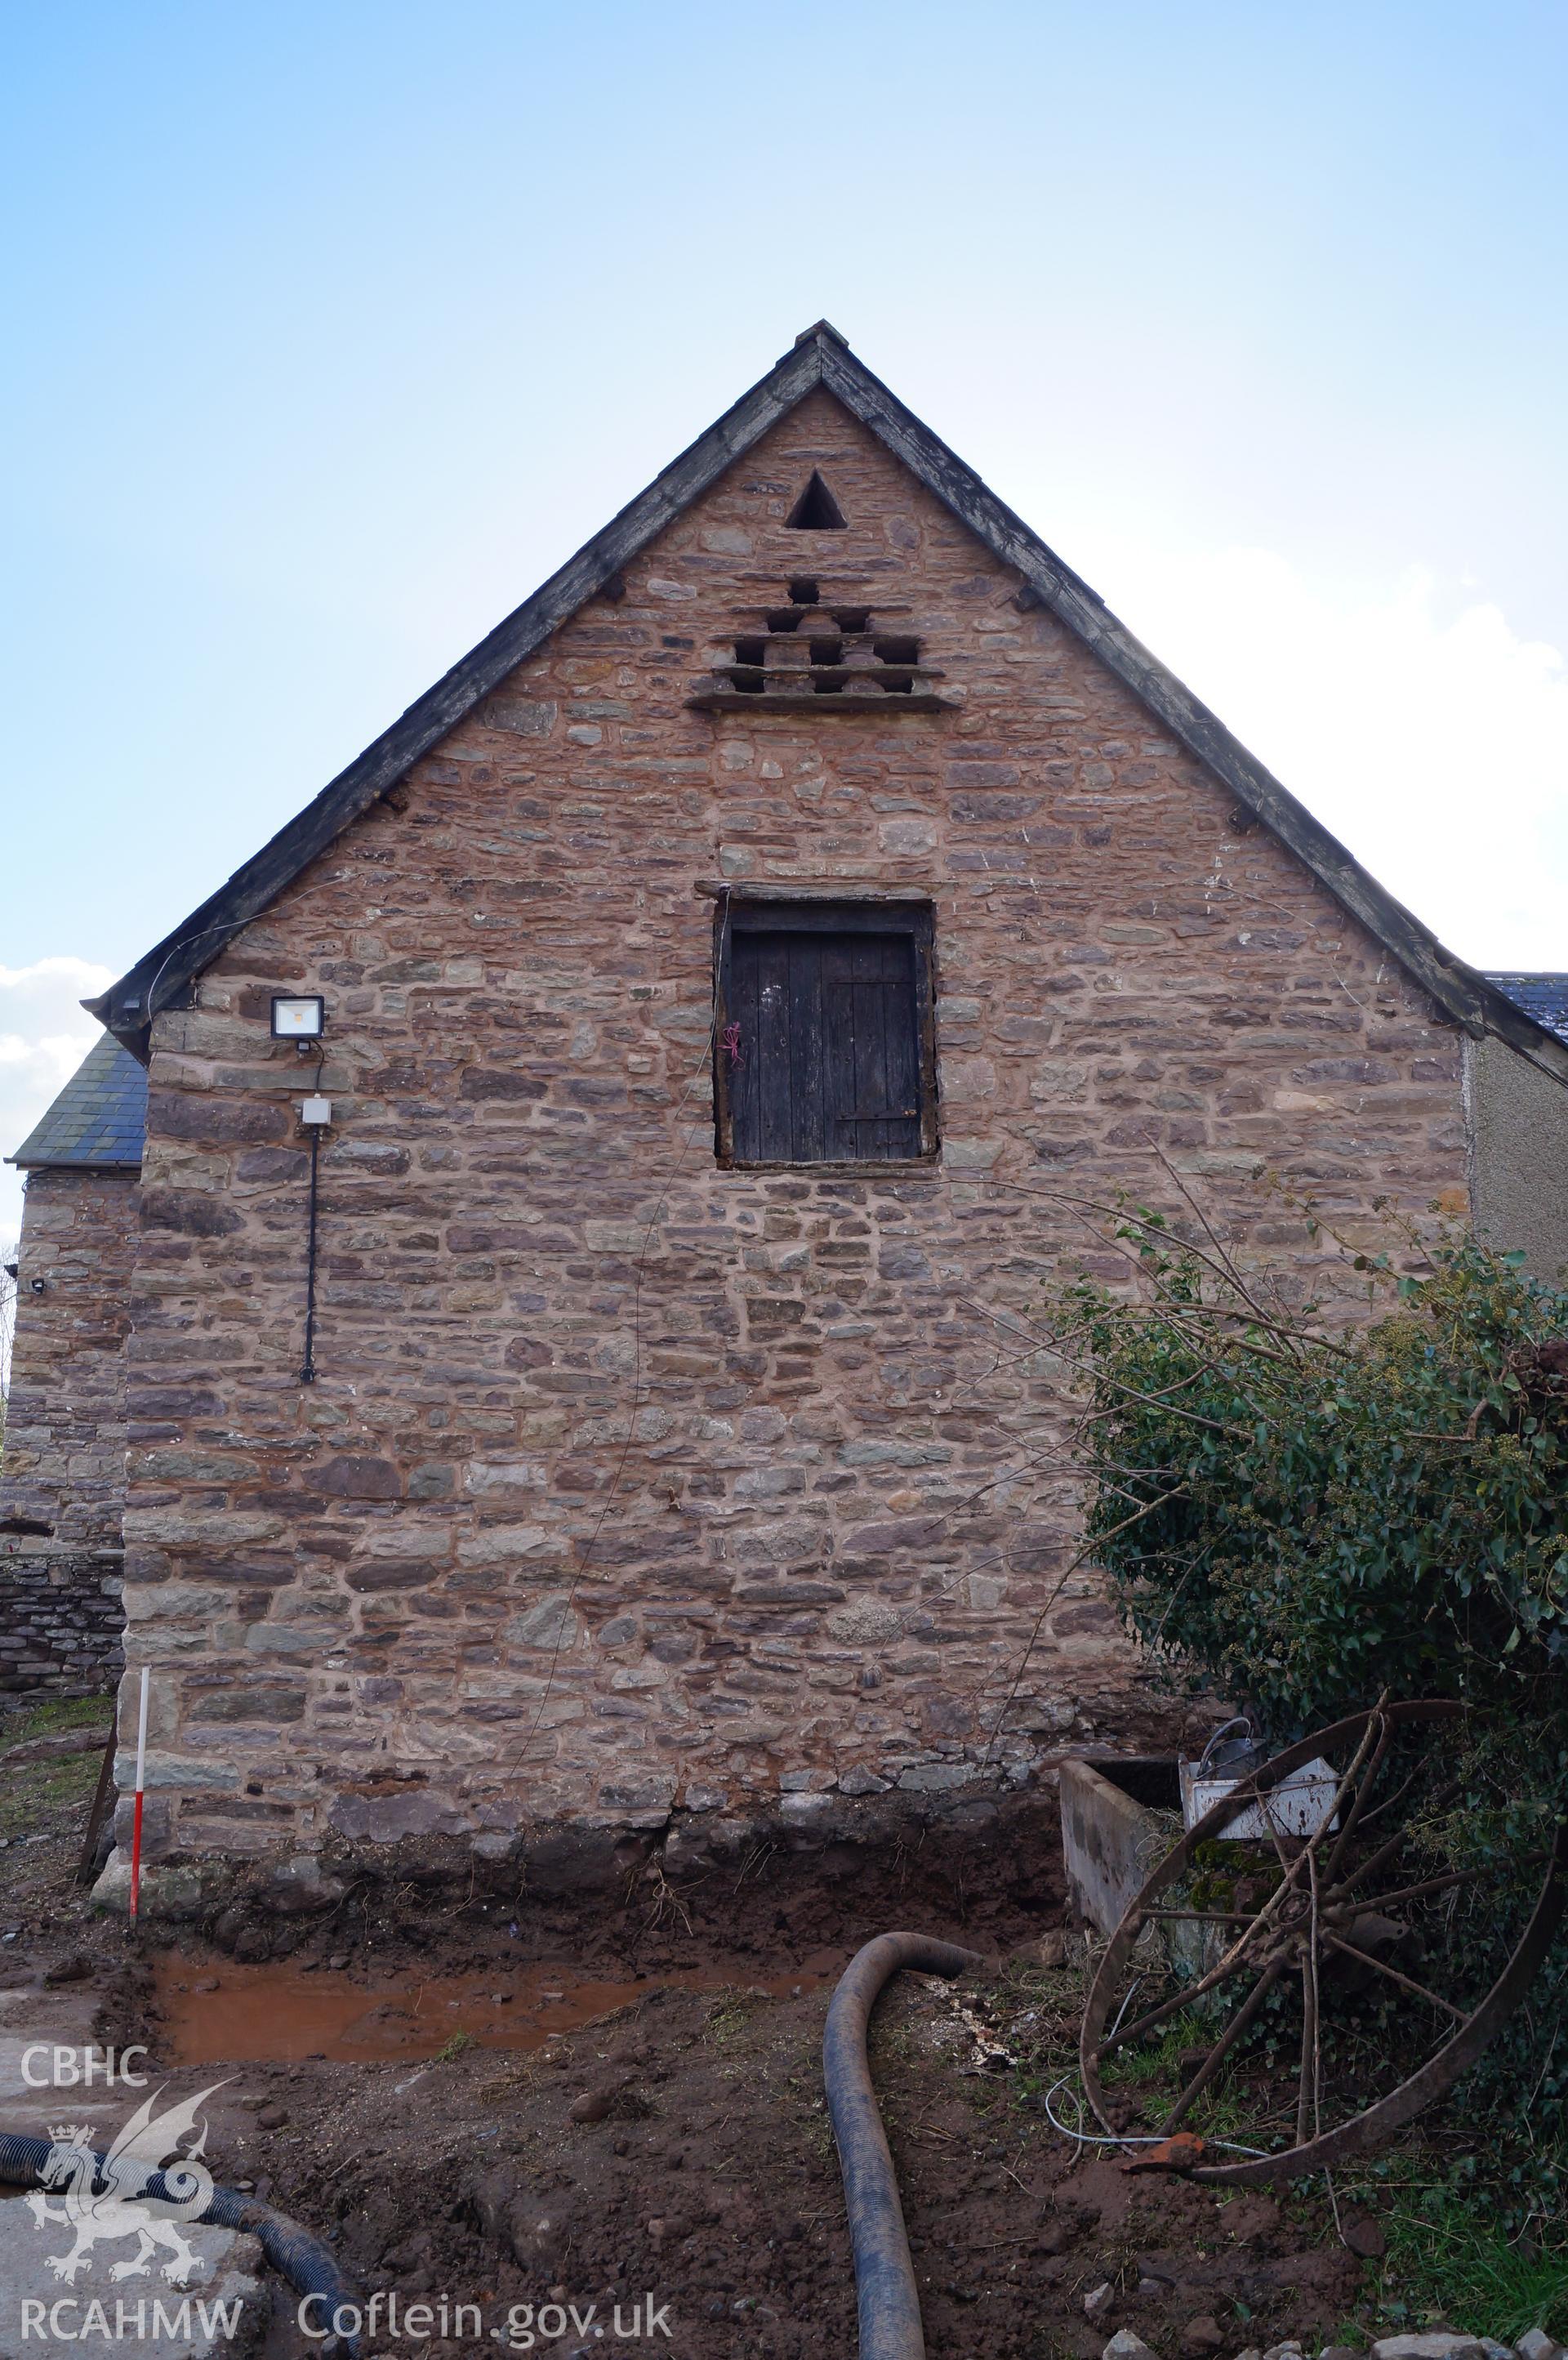 View 'looking south southwest at the exterior of the northern gable of the stable' on Gwrlodau Farm, Llanbedr, Crickhowell. Photograph and description by Jenny Hall and Paul Sambrook of Trysor, 9th February 2018.